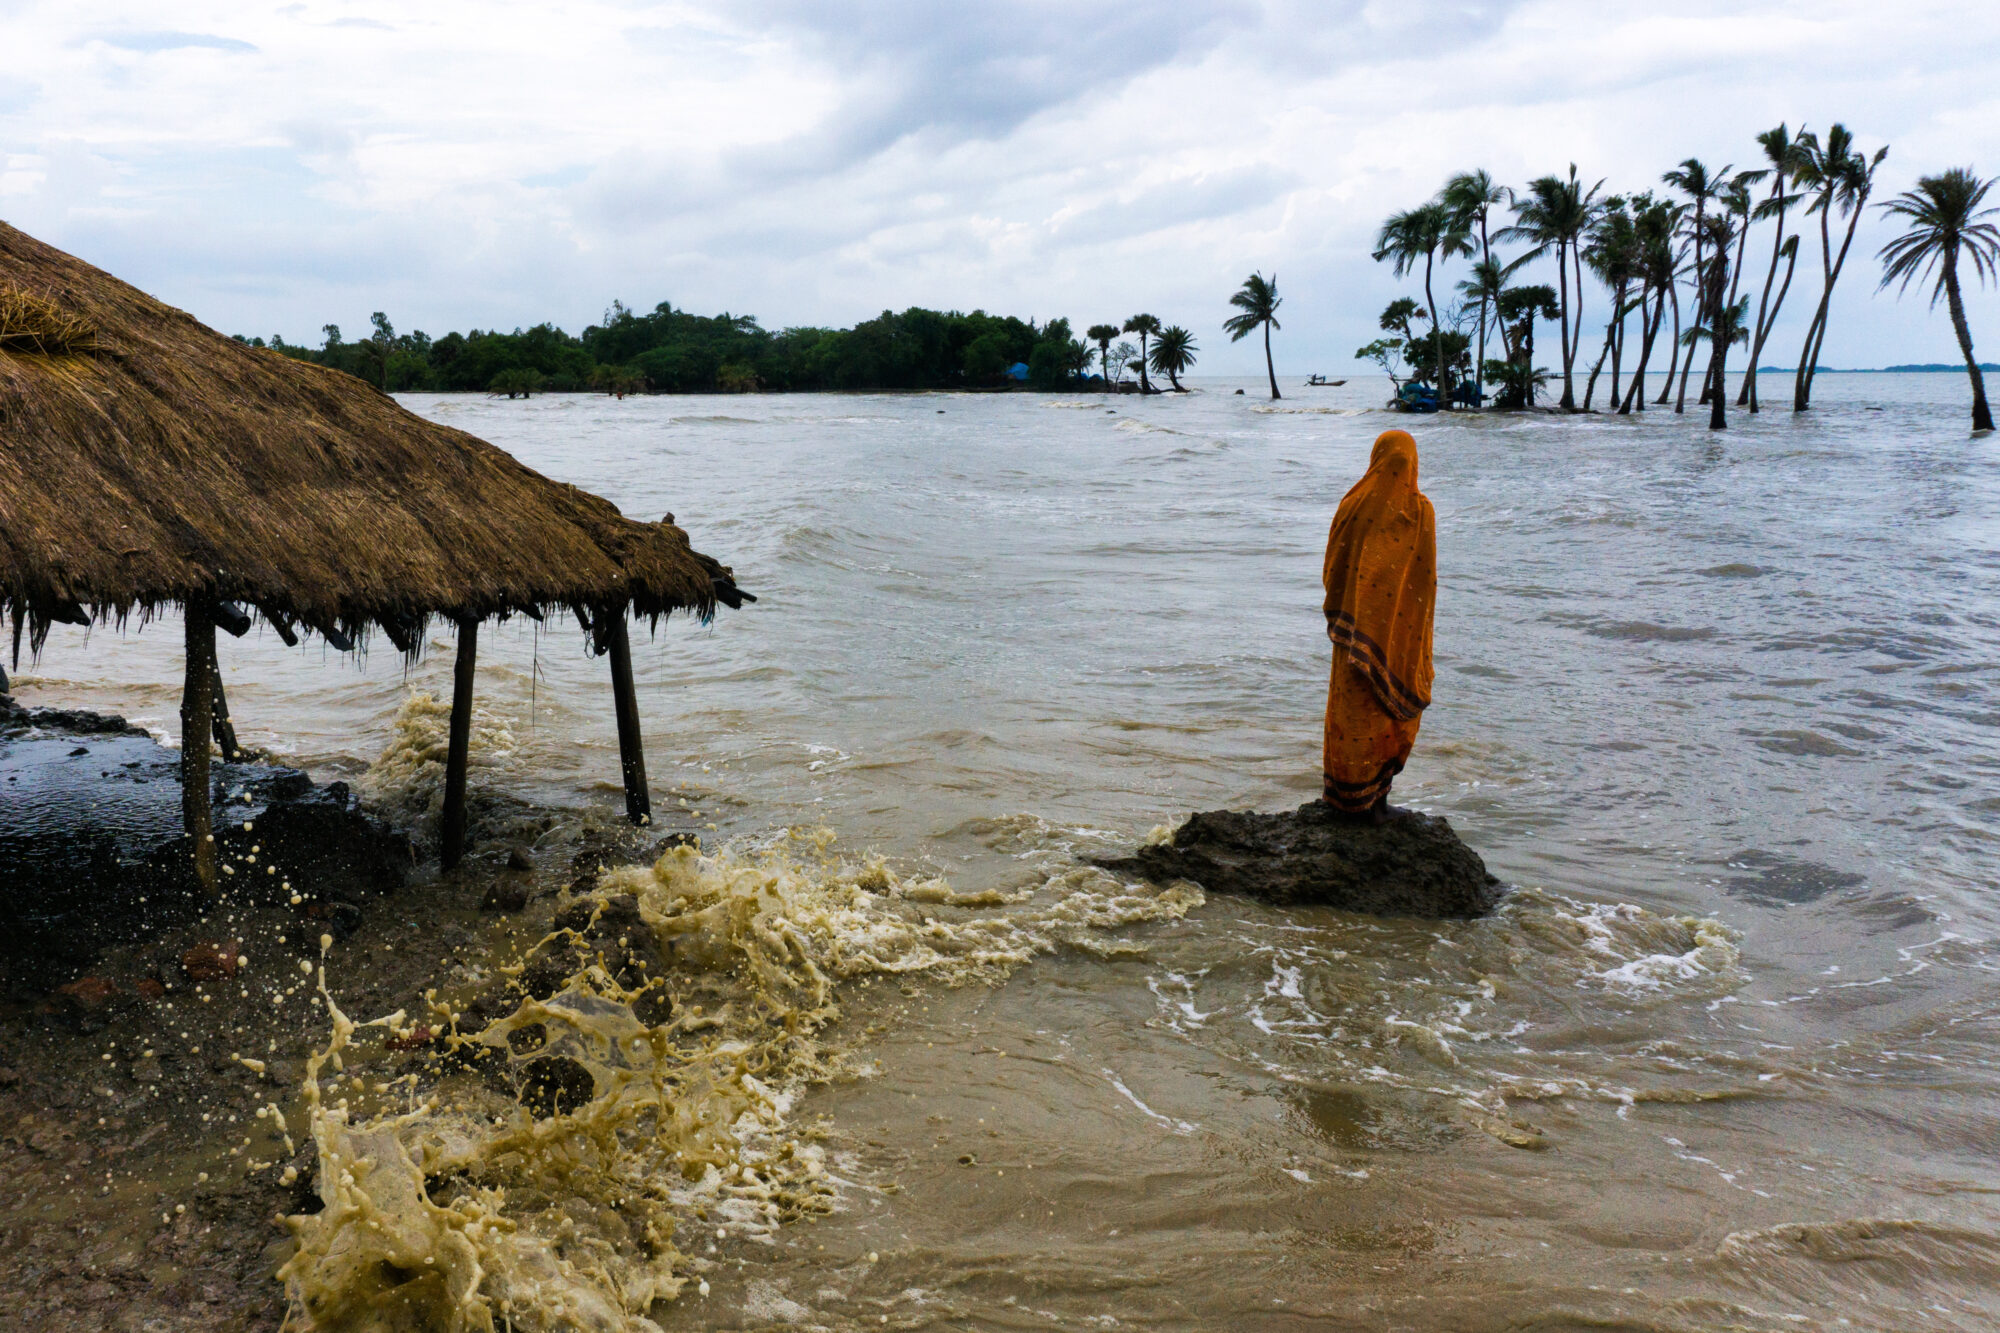 A person wearing traditional sari stands on a rock, surrounded on all sides by rising dirty sea water. The waves of brown water break against a small hut to the left.